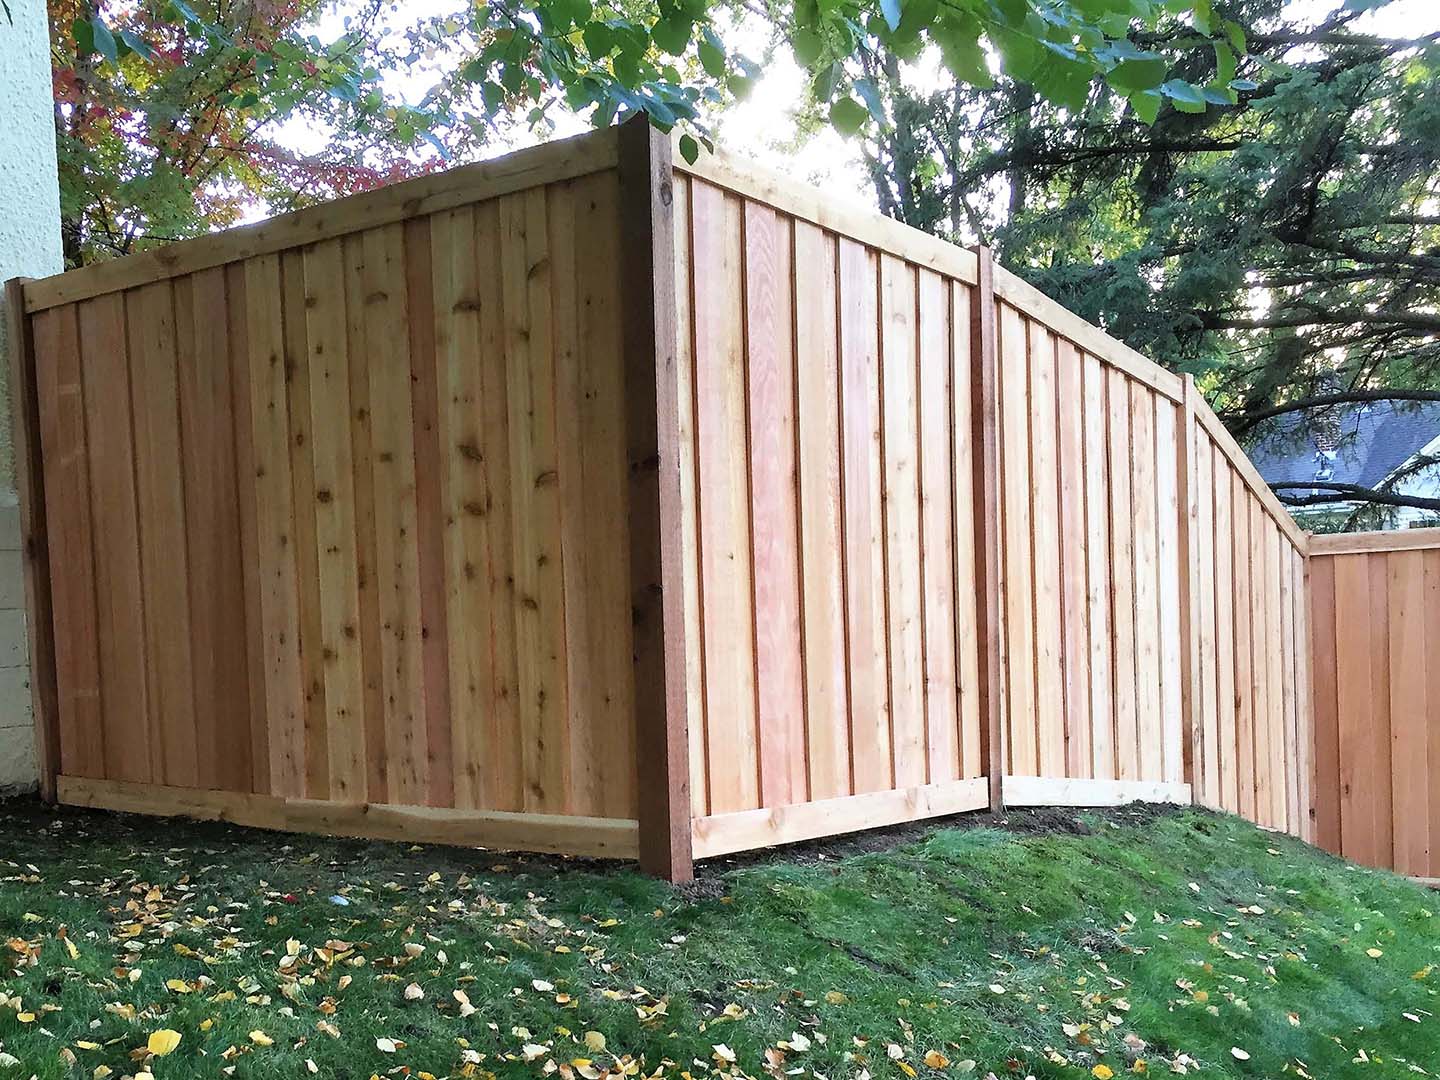 Wyoming MN cap and trim style wood fence